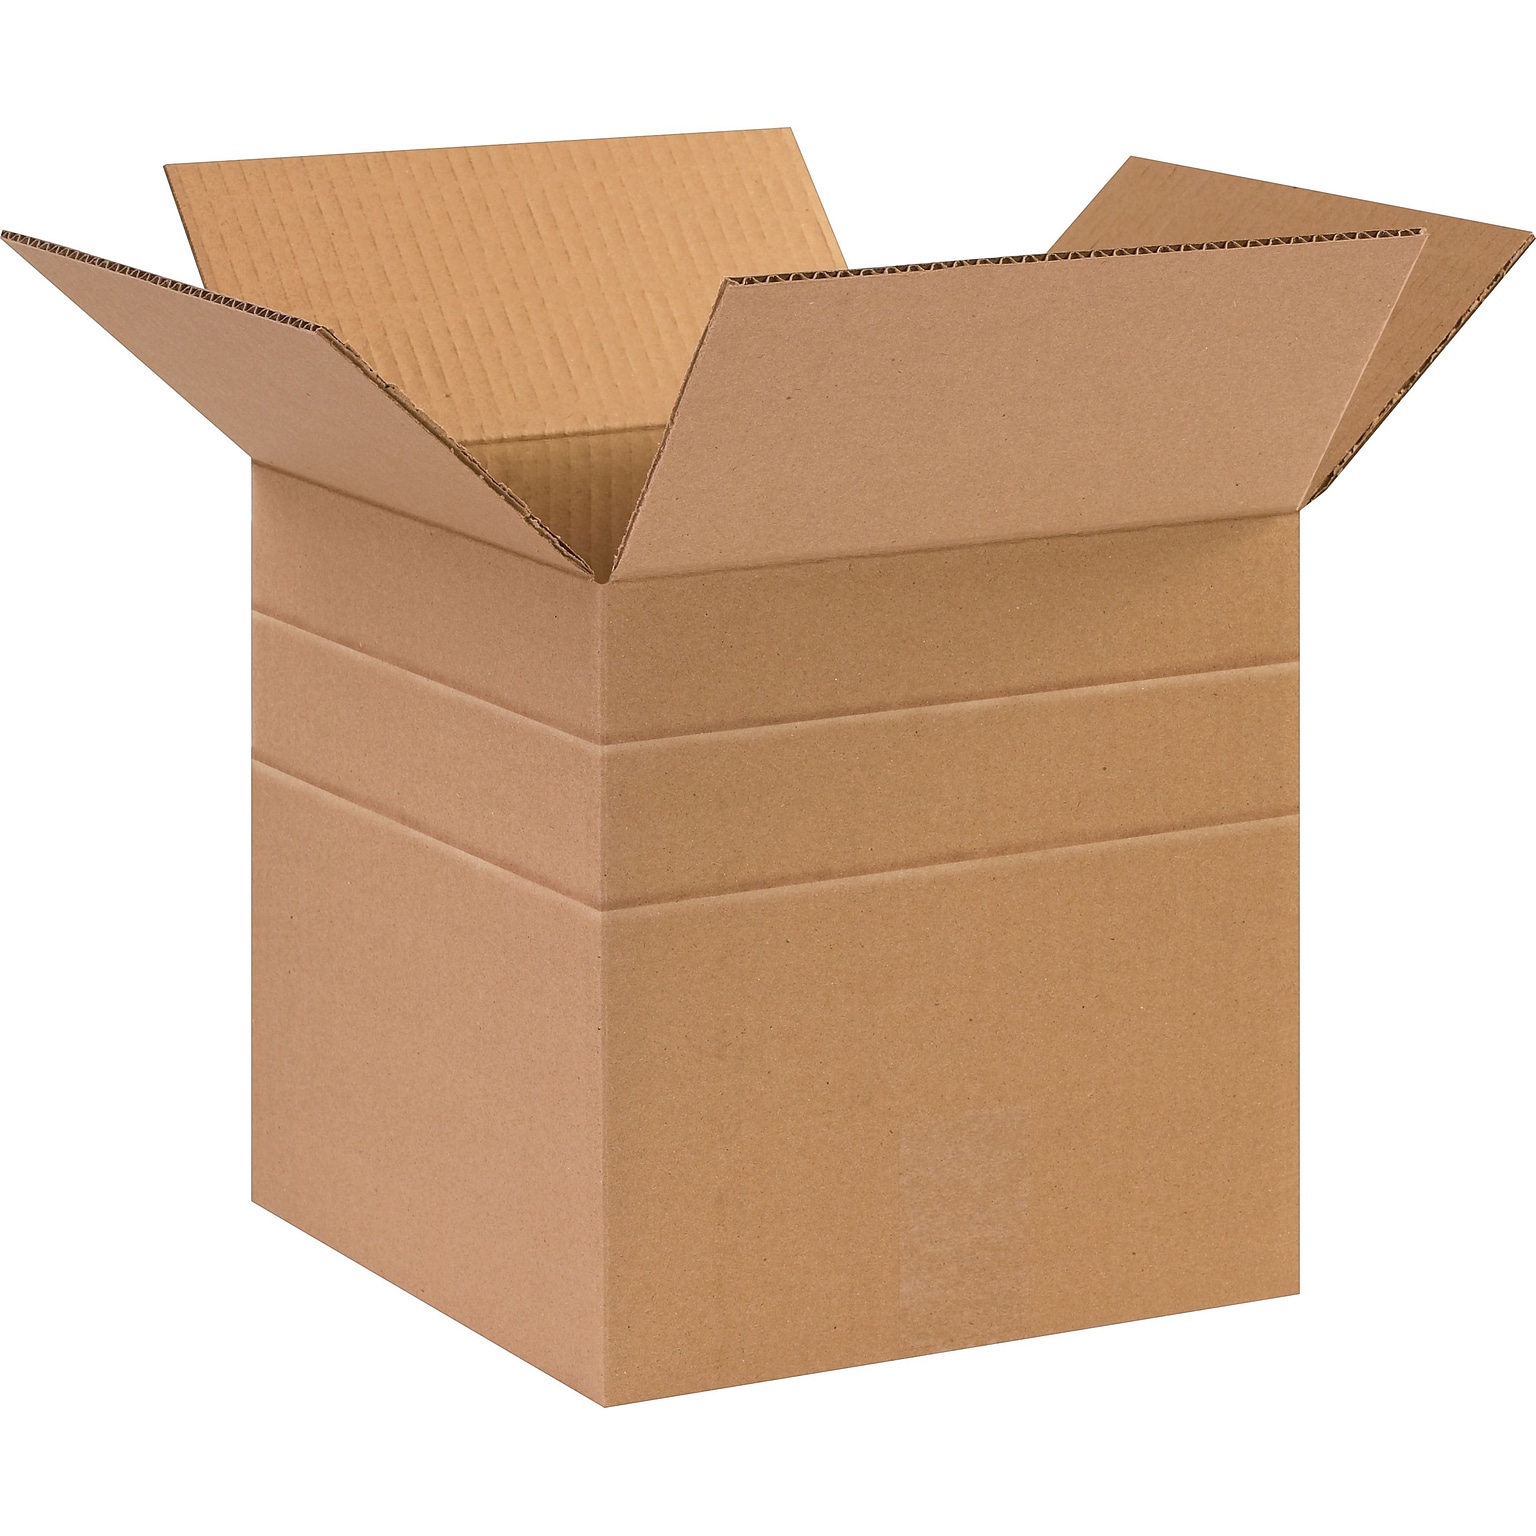 SI Products 10 x 10 x 10 Multi-Depth Shipping Boxes, Brown, 25/Bundle (MD101010)